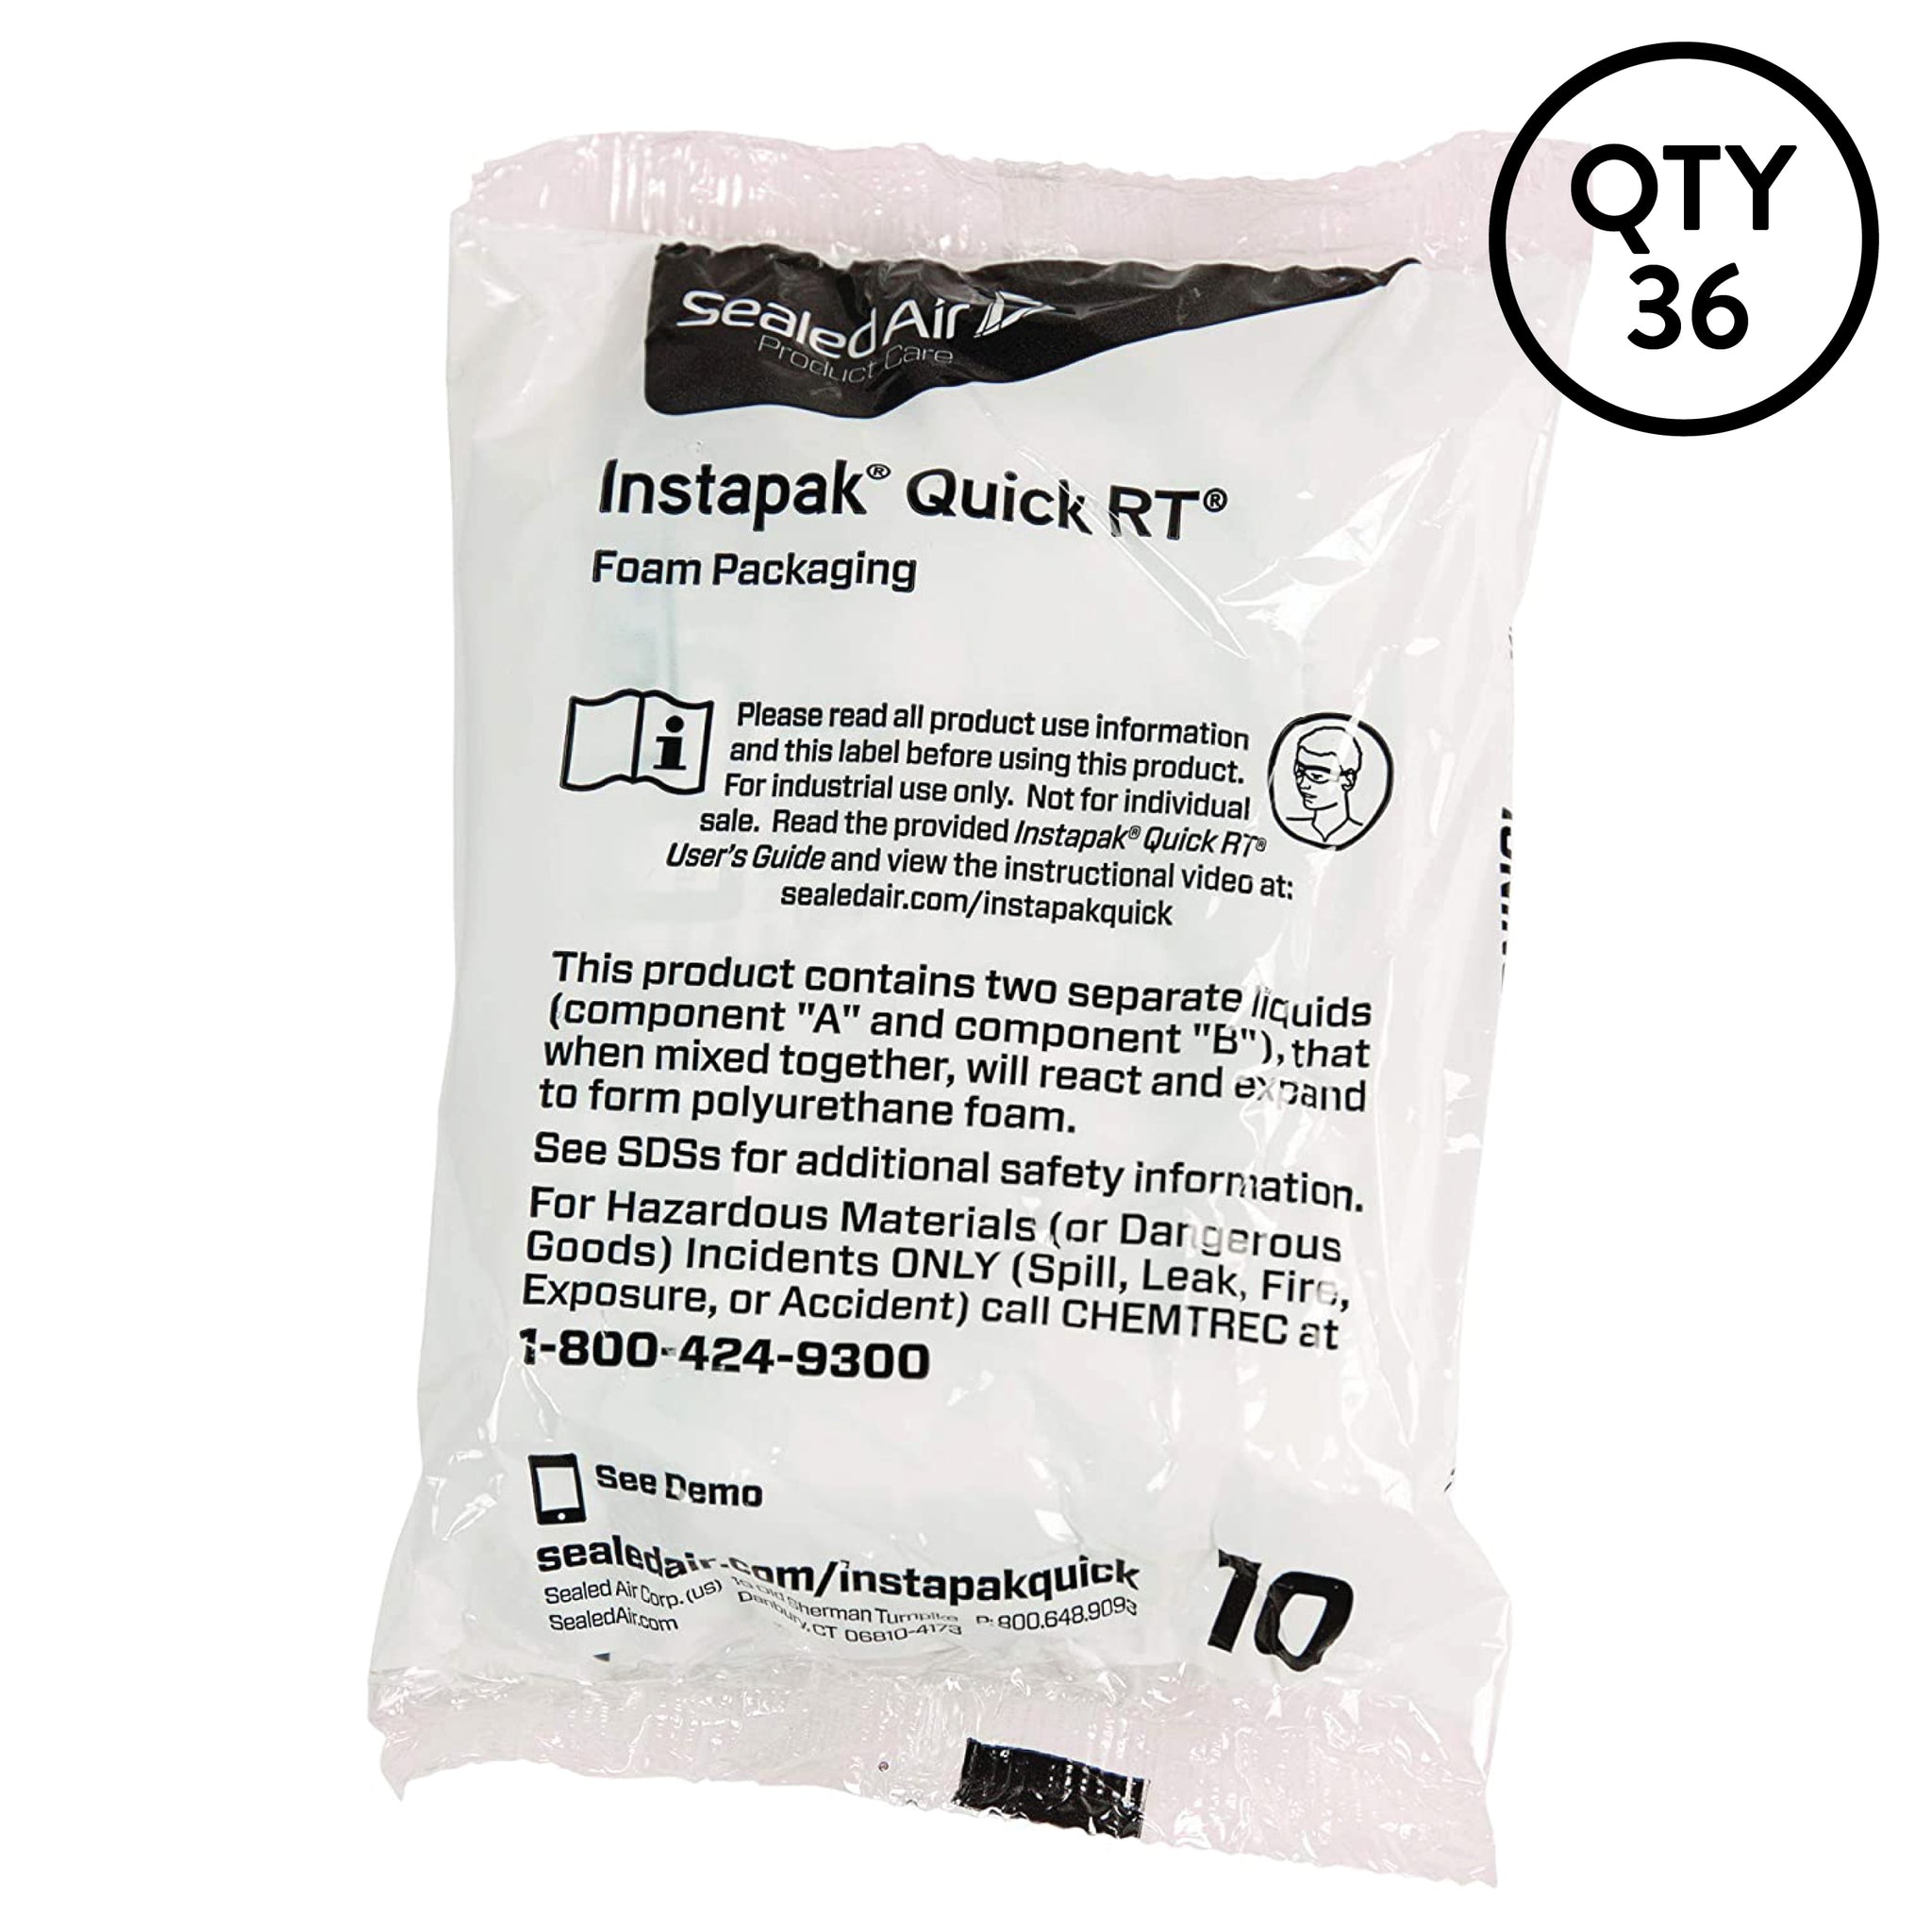 InstaPak Quick RT Bag #10 - Quick & Safe Gift Packing 15 x 18 (2 pack)